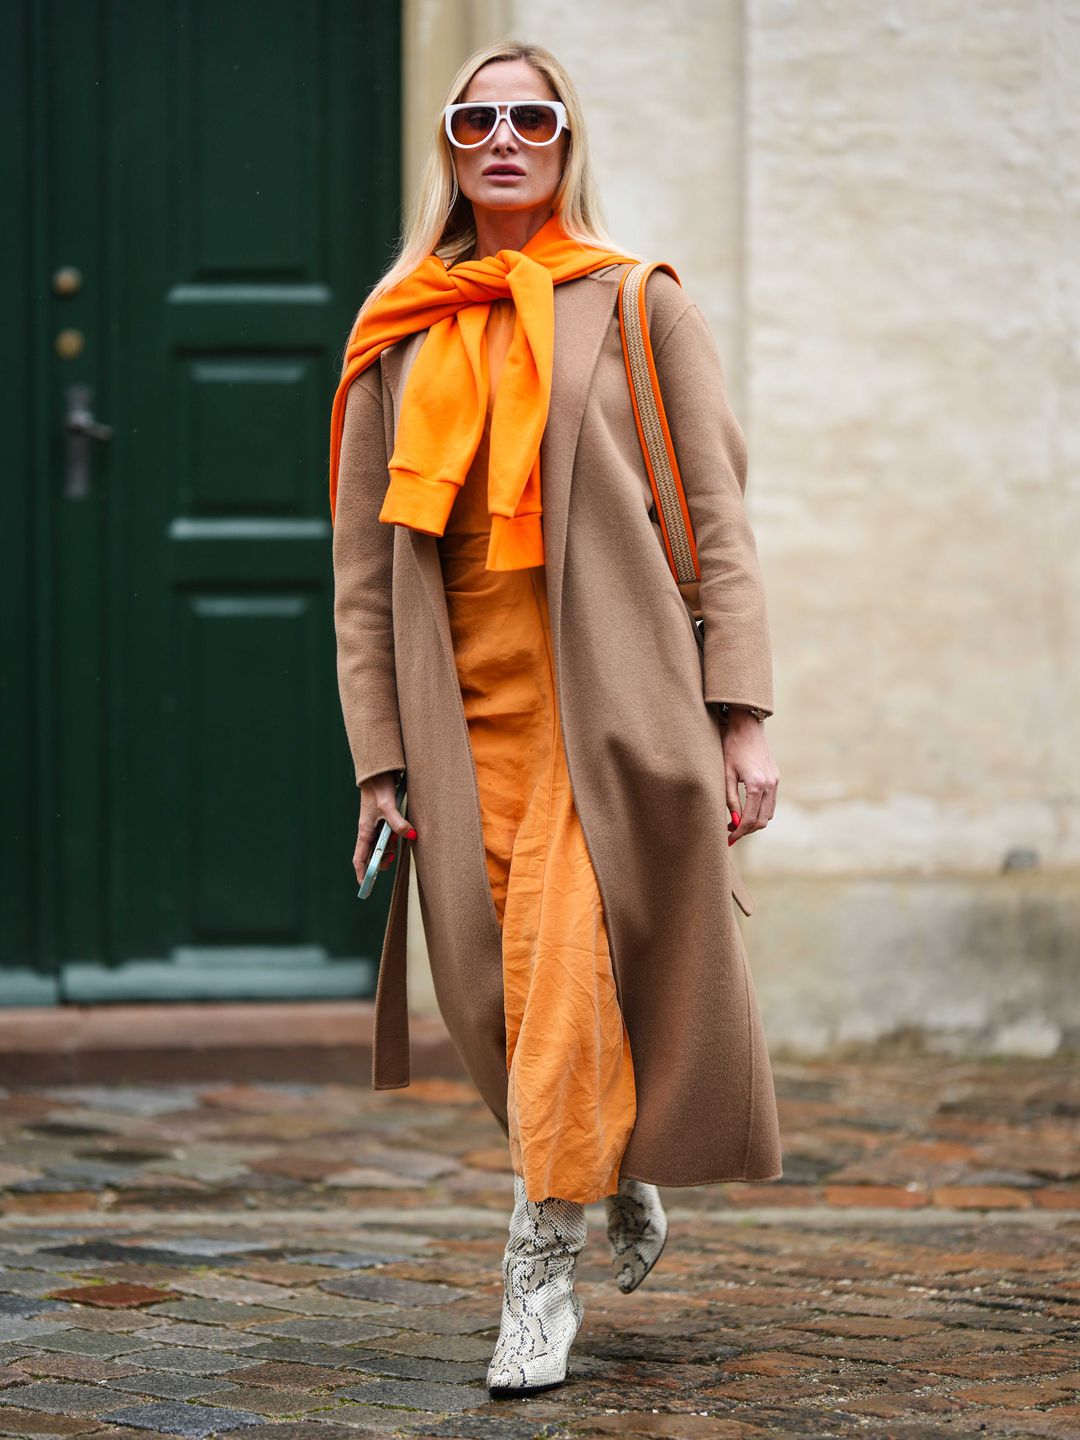 Fashion Week guest wearing a camel coat over an orange outfit 